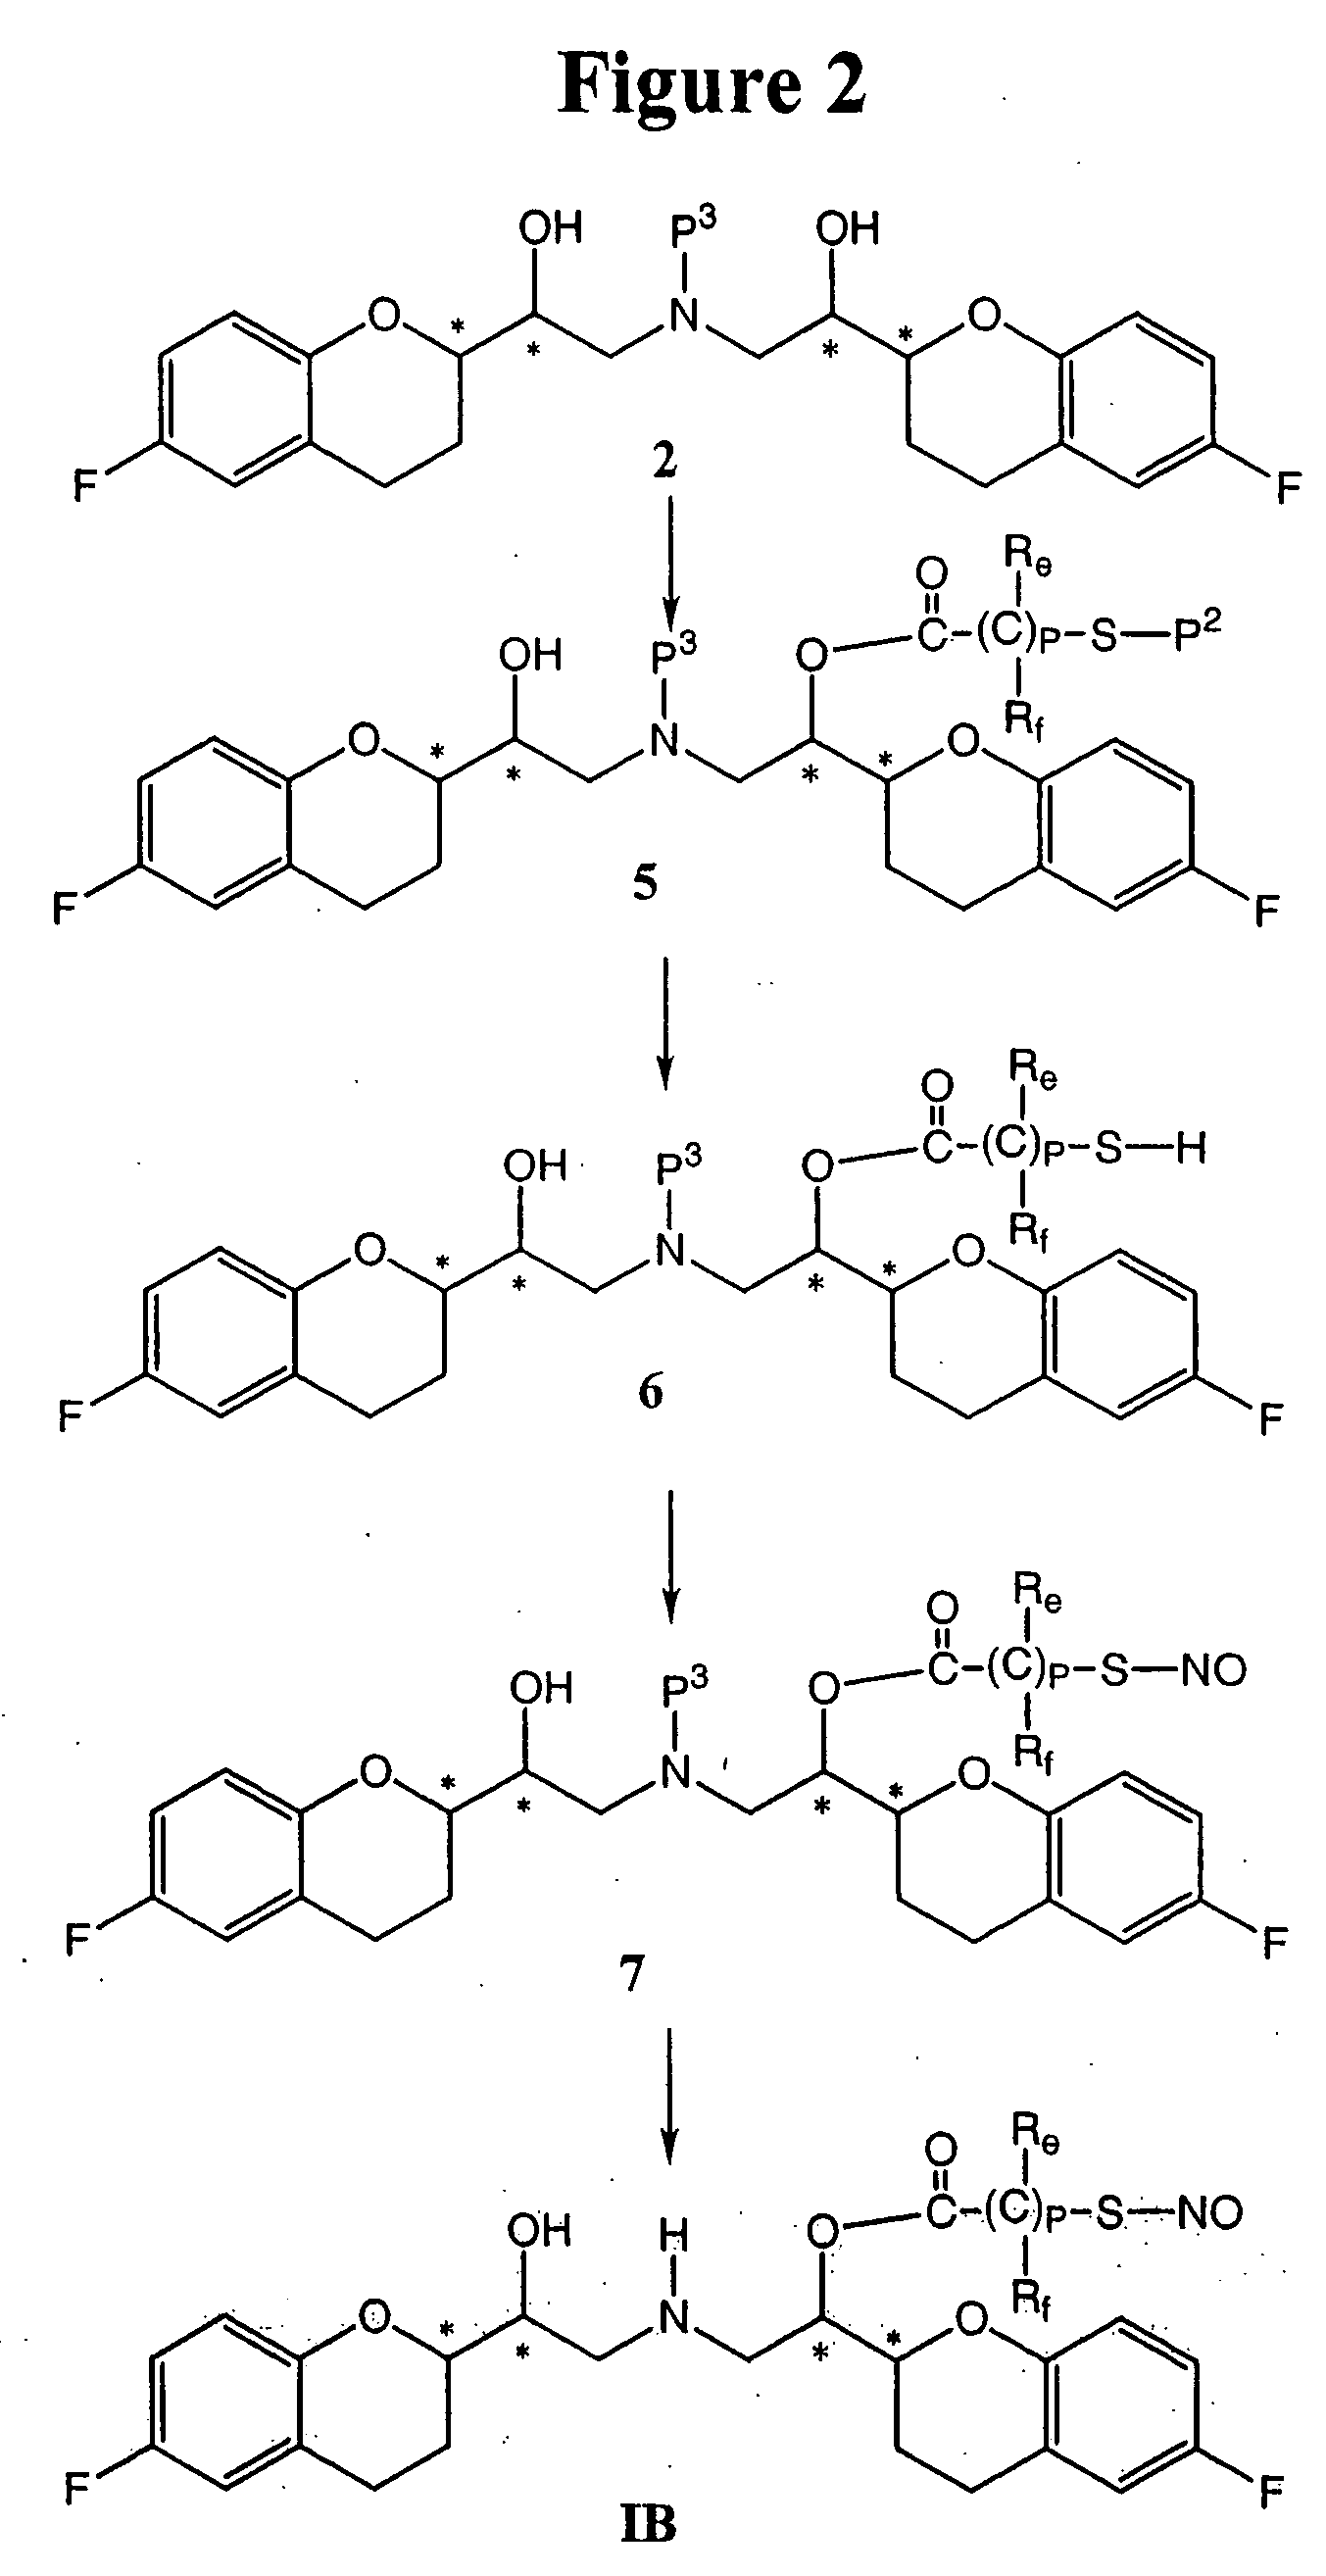 Nebivolol and its metabolites in combination with nitric oxide donors, compositions and methods of use